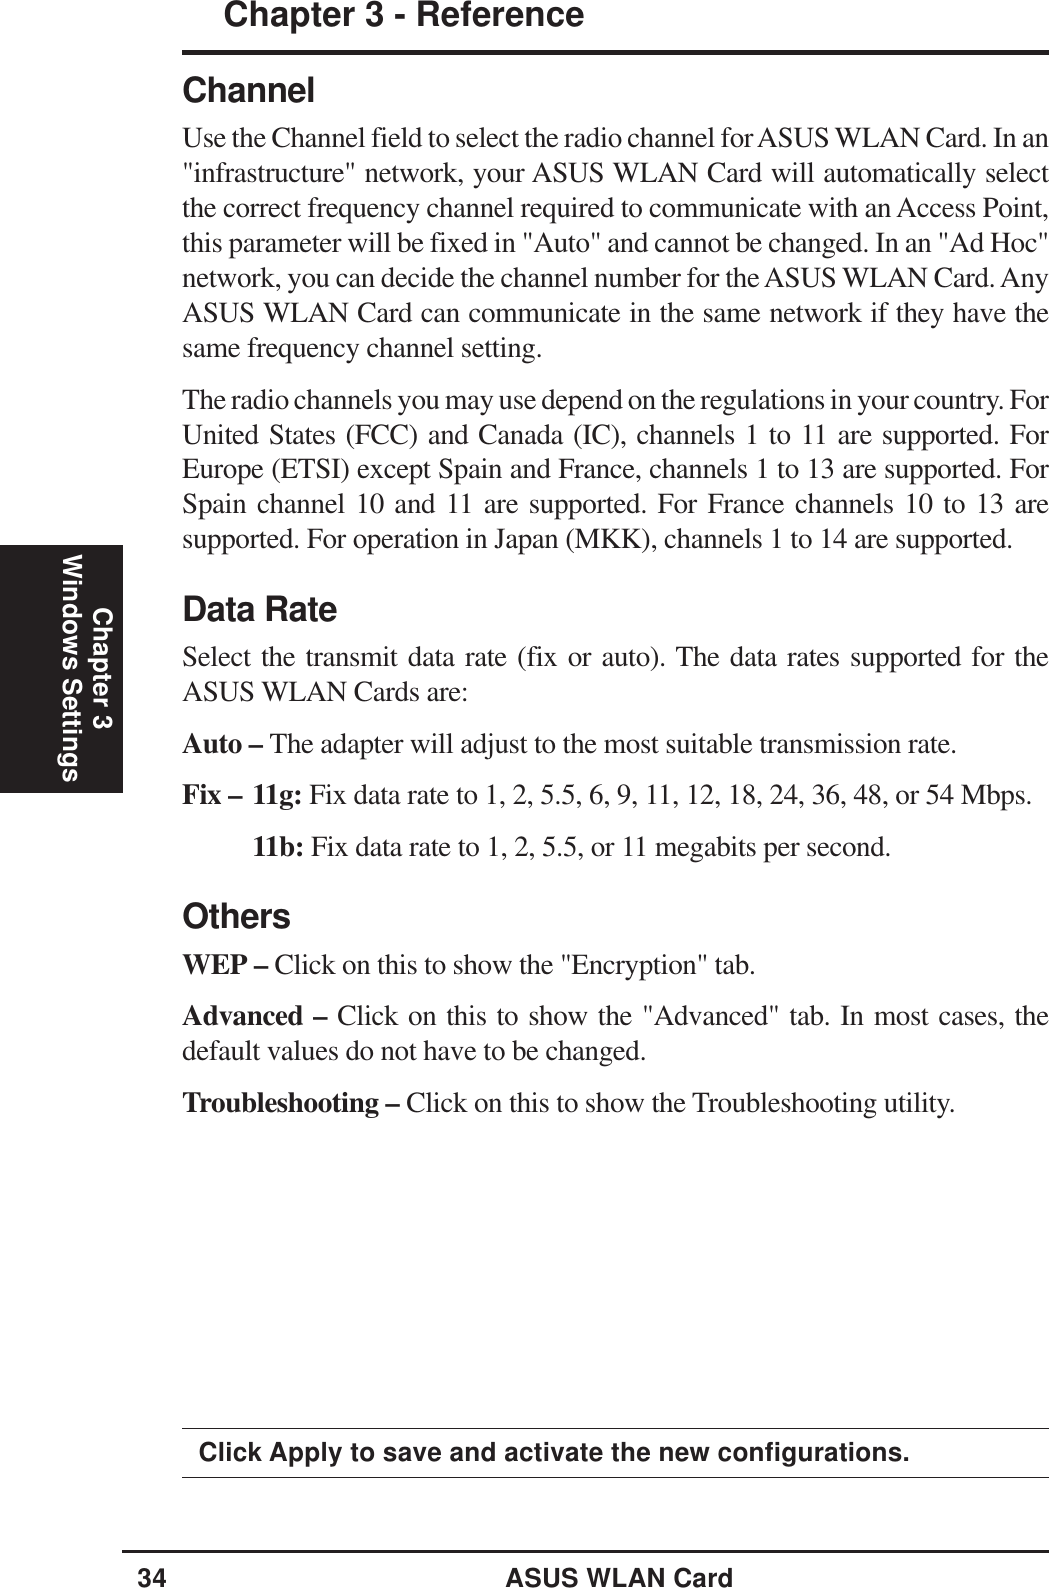 34 ASUS WLAN CardChapter 3 - ReferenceChapter 3Windows SettingsClick Apply to save and activate the new configurations.ChannelUse the Channel field to select the radio channel for ASUS WLAN Card. In an&quot;infrastructure&quot; network, your ASUS WLAN Card will automatically selectthe correct frequency channel required to communicate with an Access Point,this parameter will be fixed in &quot;Auto&quot; and cannot be changed. In an &quot;Ad Hoc&quot;network, you can decide the channel number for the ASUS WLAN Card. AnyASUS WLAN Card can communicate in the same network if they have thesame frequency channel setting.The radio channels you may use depend on the regulations in your country. ForUnited States (FCC) and Canada (IC), channels 1 to 11 are supported. ForEurope (ETSI) except Spain and France, channels 1 to 13 are supported. ForSpain channel 10 and 11 are supported. For France channels 10 to 13 aresupported. For operation in Japan (MKK), channels 1 to 14 are supported.Data RateSelect the transmit data rate (fix or auto). The data rates supported for theASUS WLAN Cards are:Auto – The adapter will adjust to the most suitable transmission rate.Fix – 11g: Fix data rate to 1, 2, 5.5, 6, 9, 11, 12, 18, 24, 36, 48, or 54 Mbps.11b: Fix data rate to 1, 2, 5.5, or 11 megabits per second.OthersWEP – Click on this to show the &quot;Encryption&quot; tab.Advanced – Click on this to show the &quot;Advanced&quot; tab. In most cases, thedefault values do not have to be changed.Troubleshooting – Click on this to show the Troubleshooting utility.